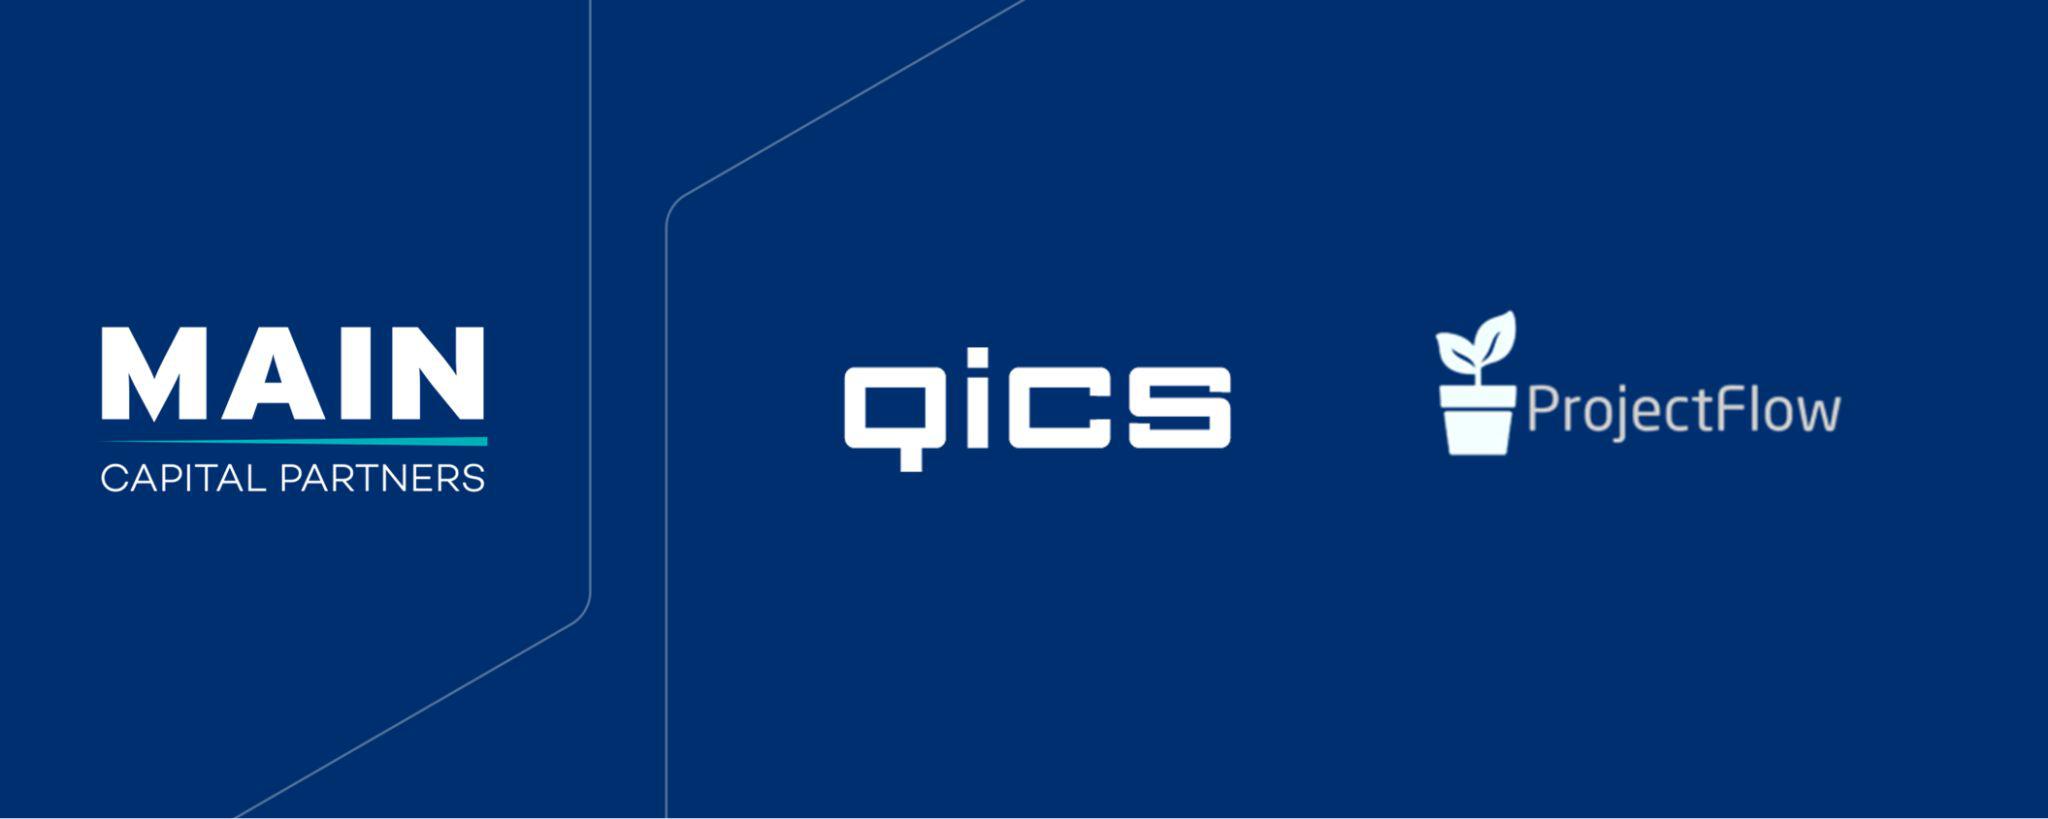 Qics expands into the Scandinavian market with the acquisition of the Danish company Projectflow